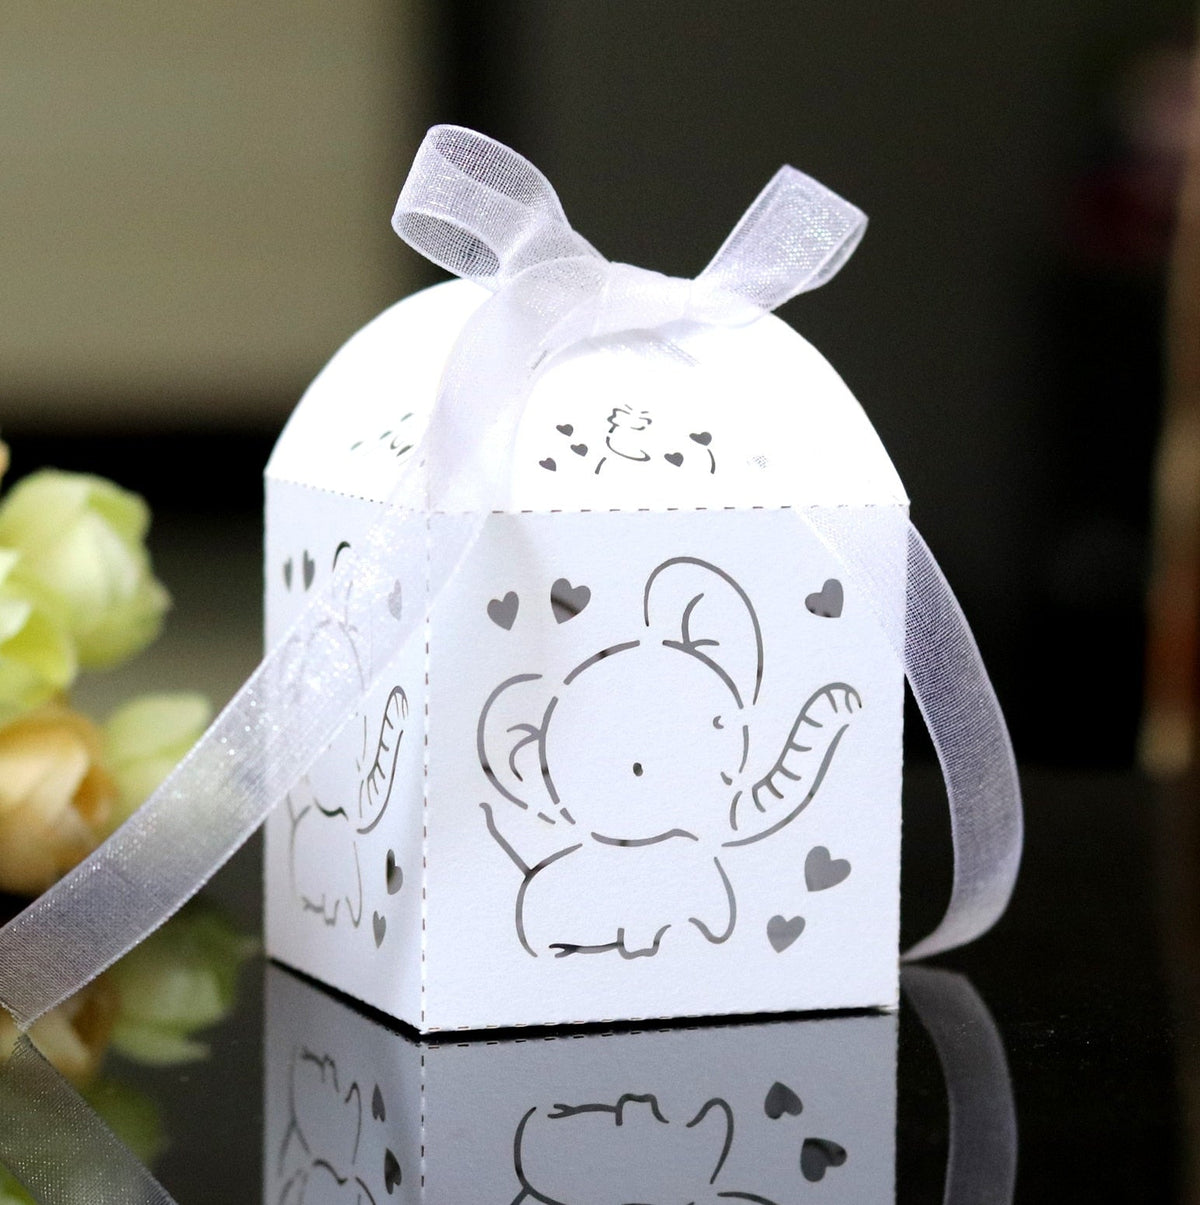 10pcs Elephant Shaped Candy Box for Baby Shower Cute Gift Boxes for Children Birthday Party Favors Packaging Supplies Wholesale